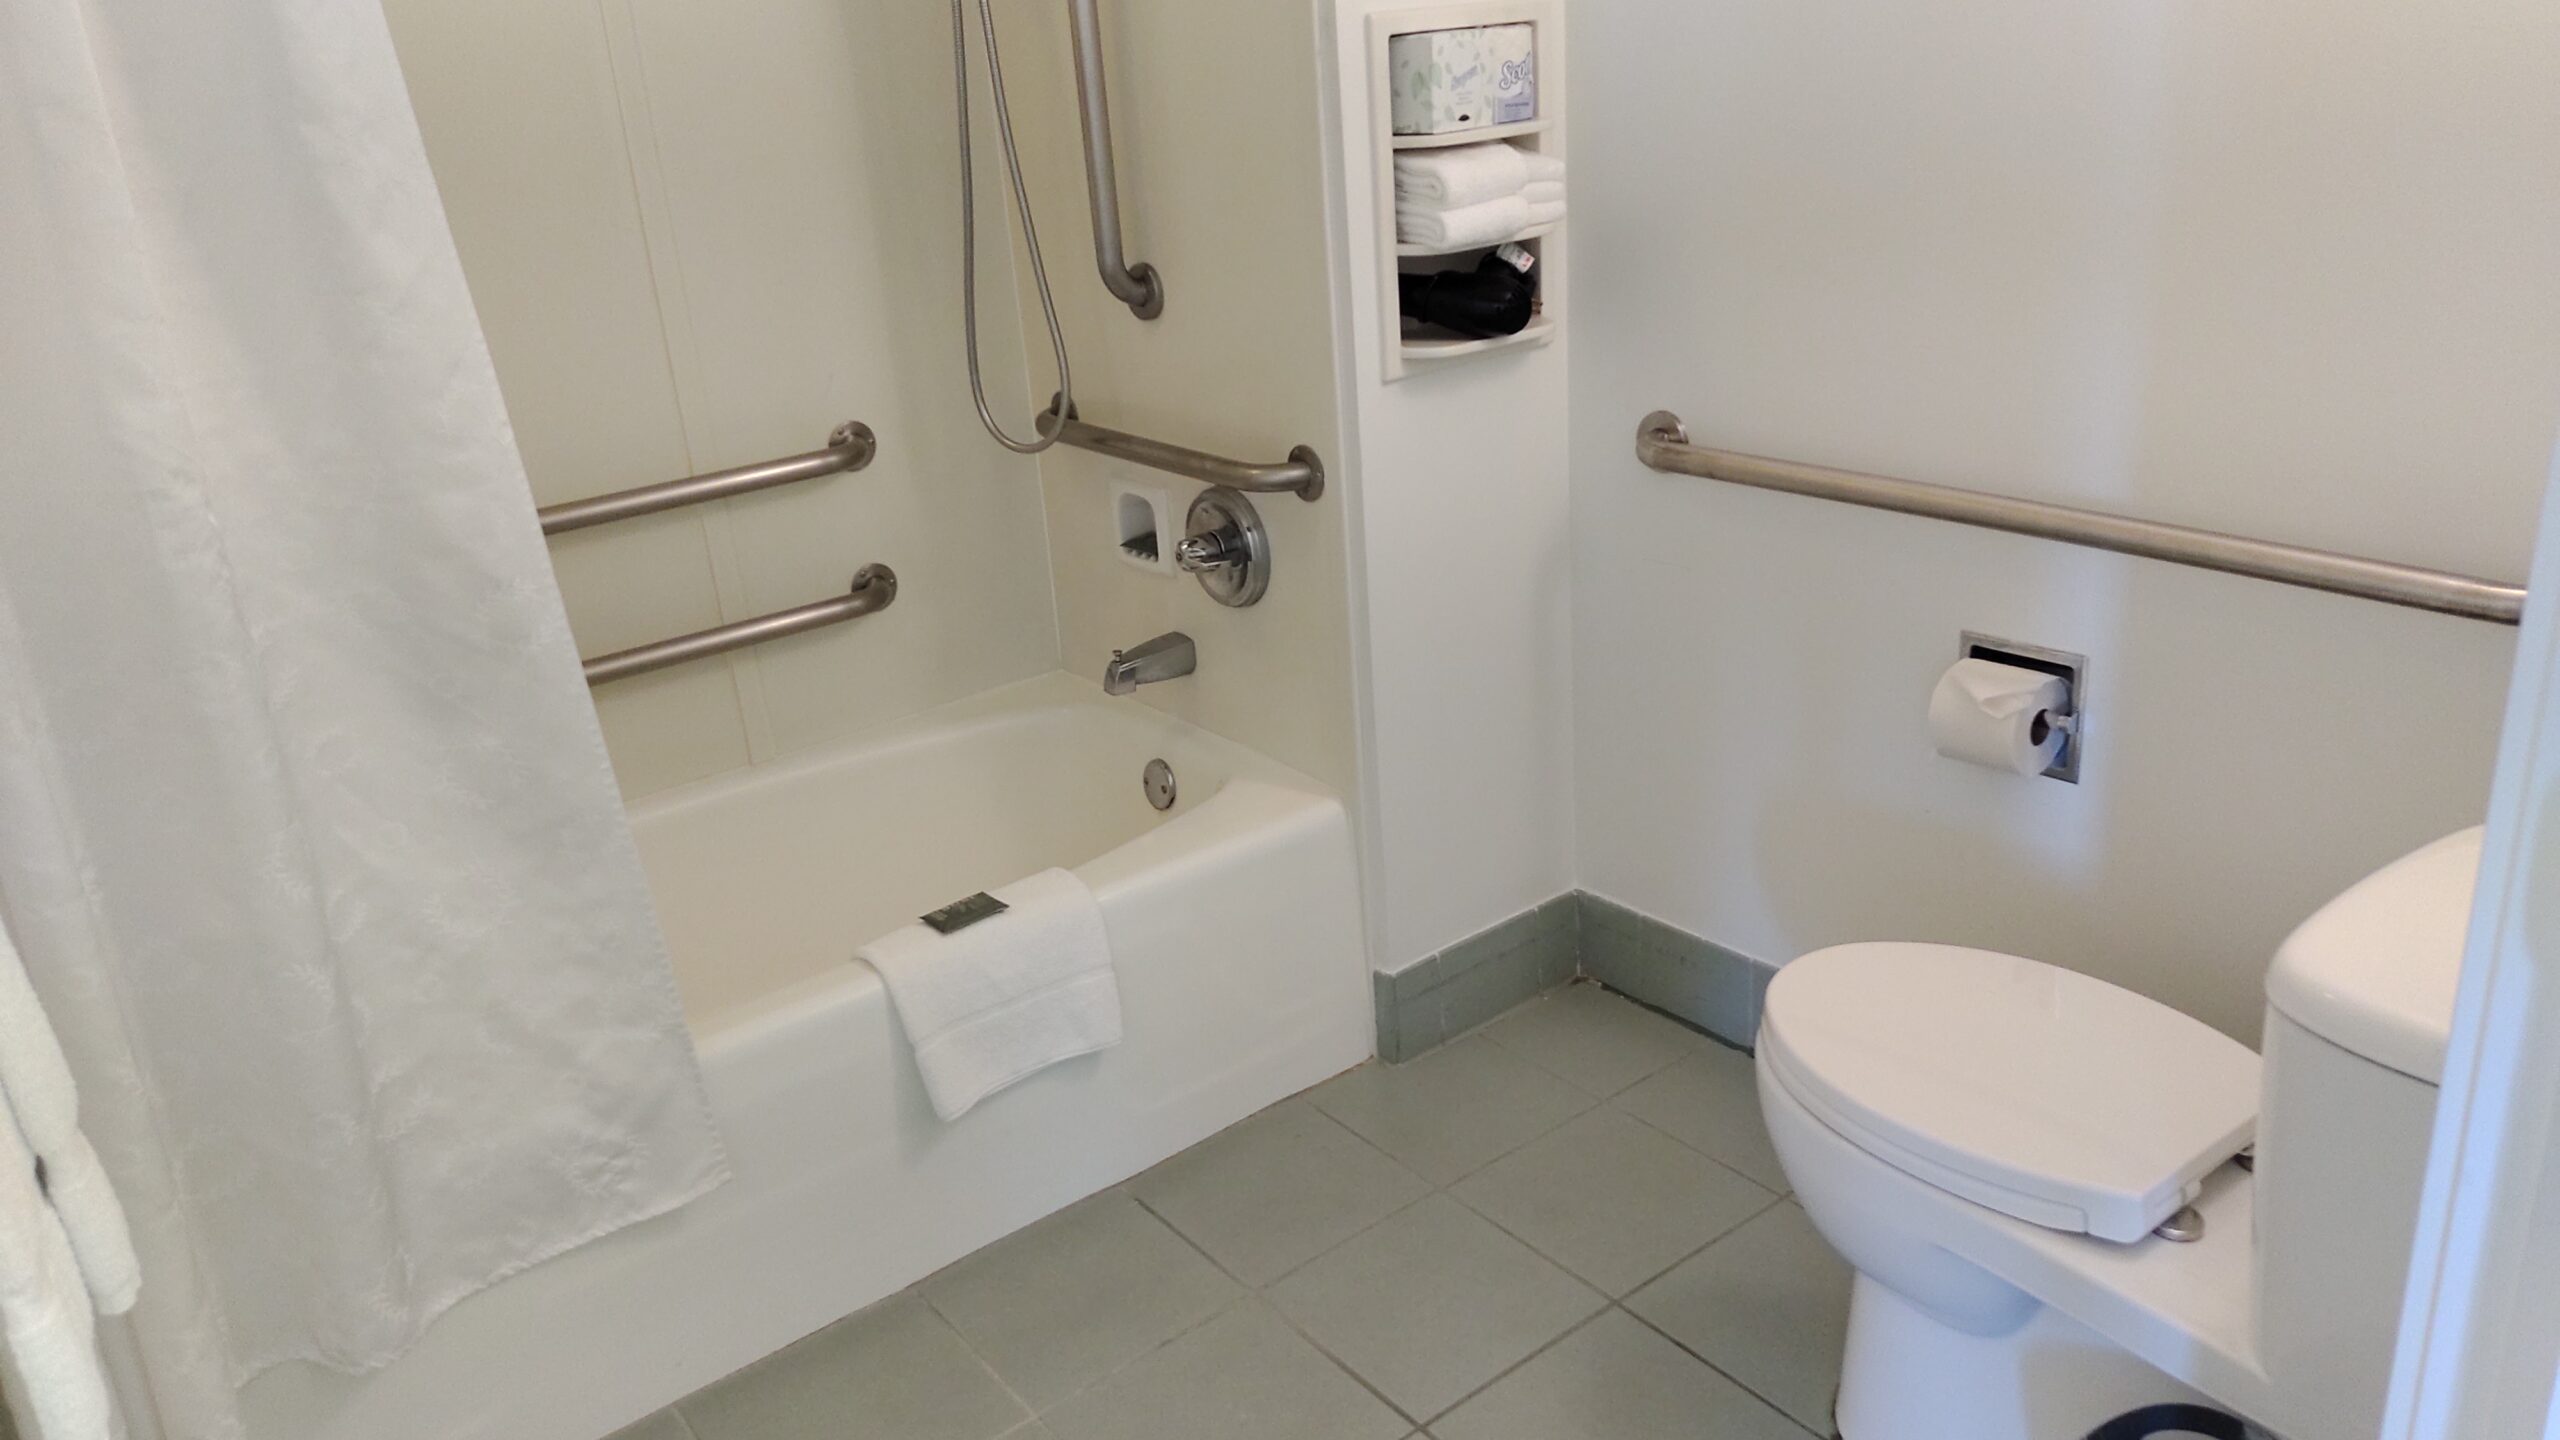 picture of the tub and toilet area.